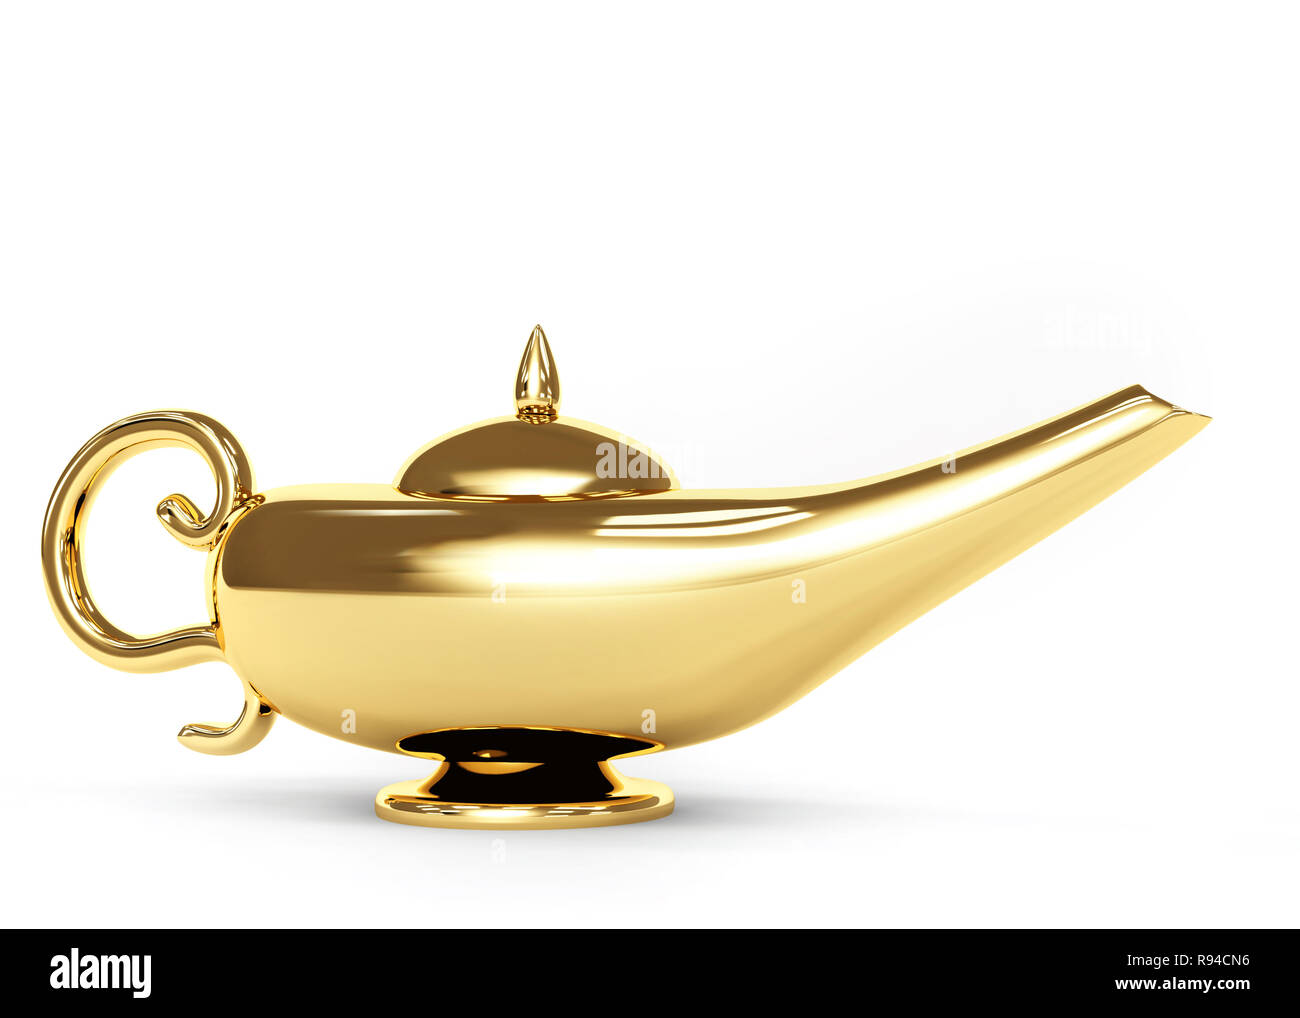 Symbol performance of desires - magic lamp. Object over white Stock Photo